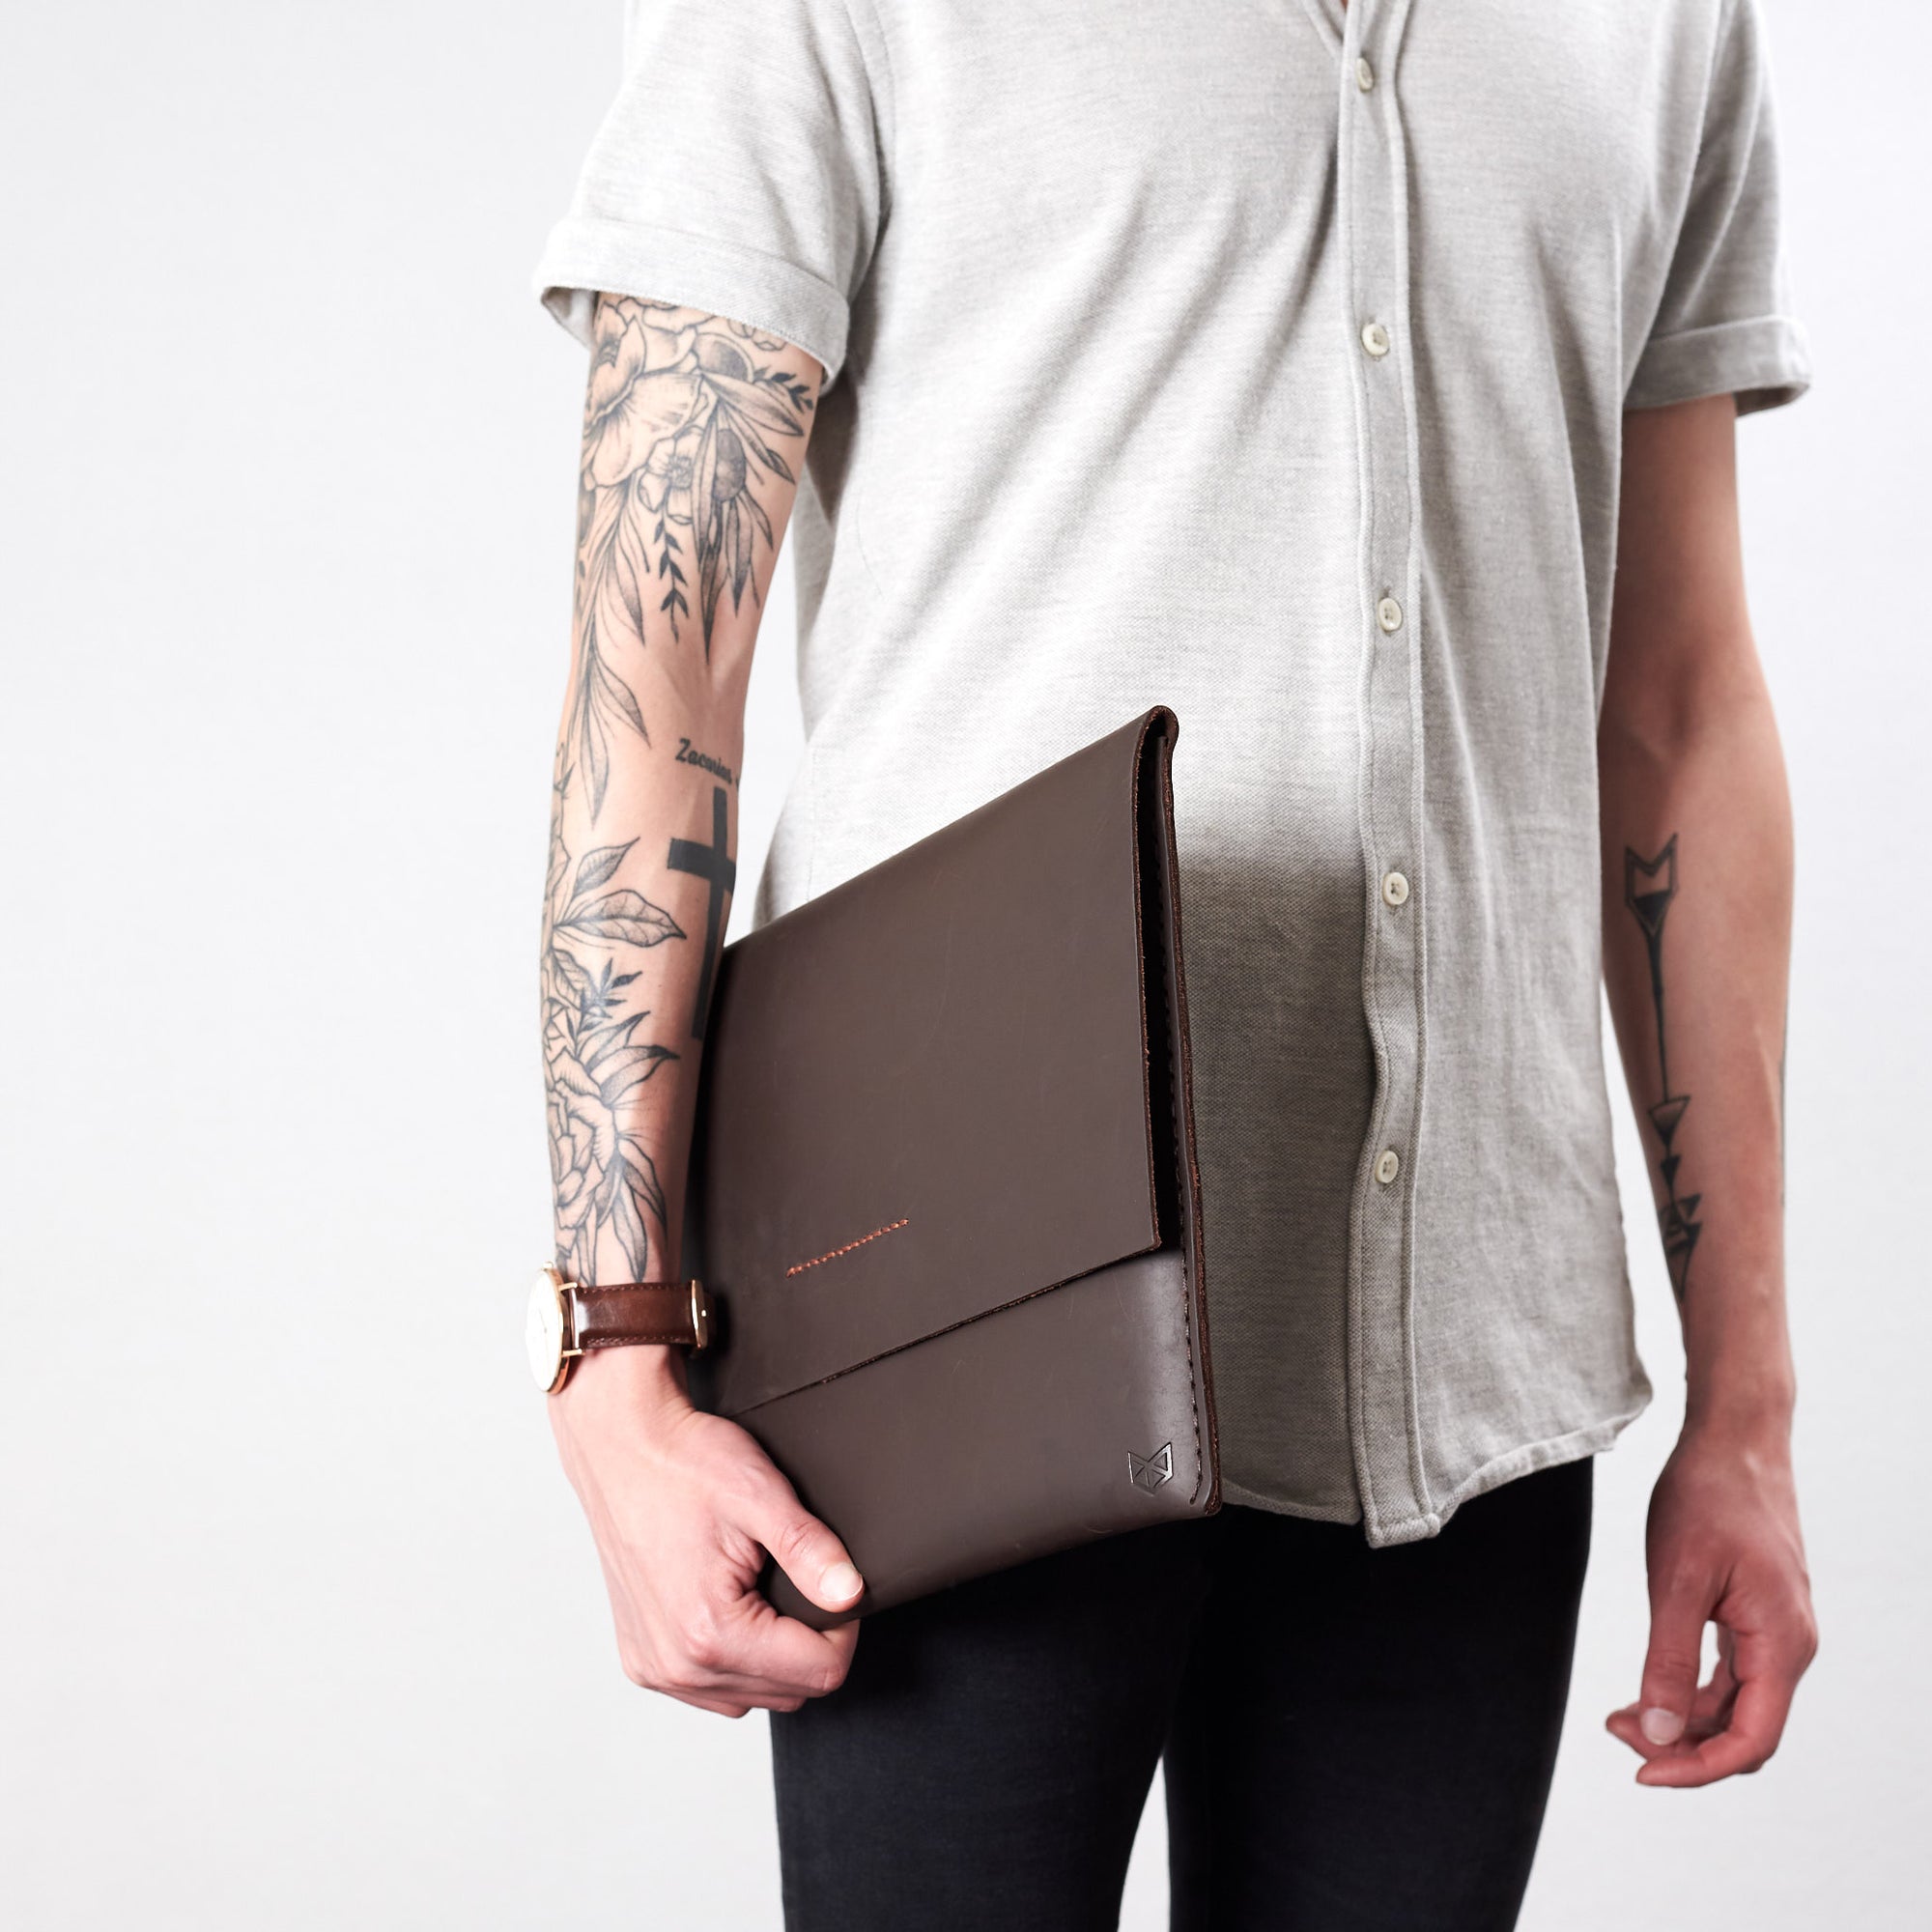 Style front view. Marron draftsman 1 case by Capra Leather. ZenBook sleeve.